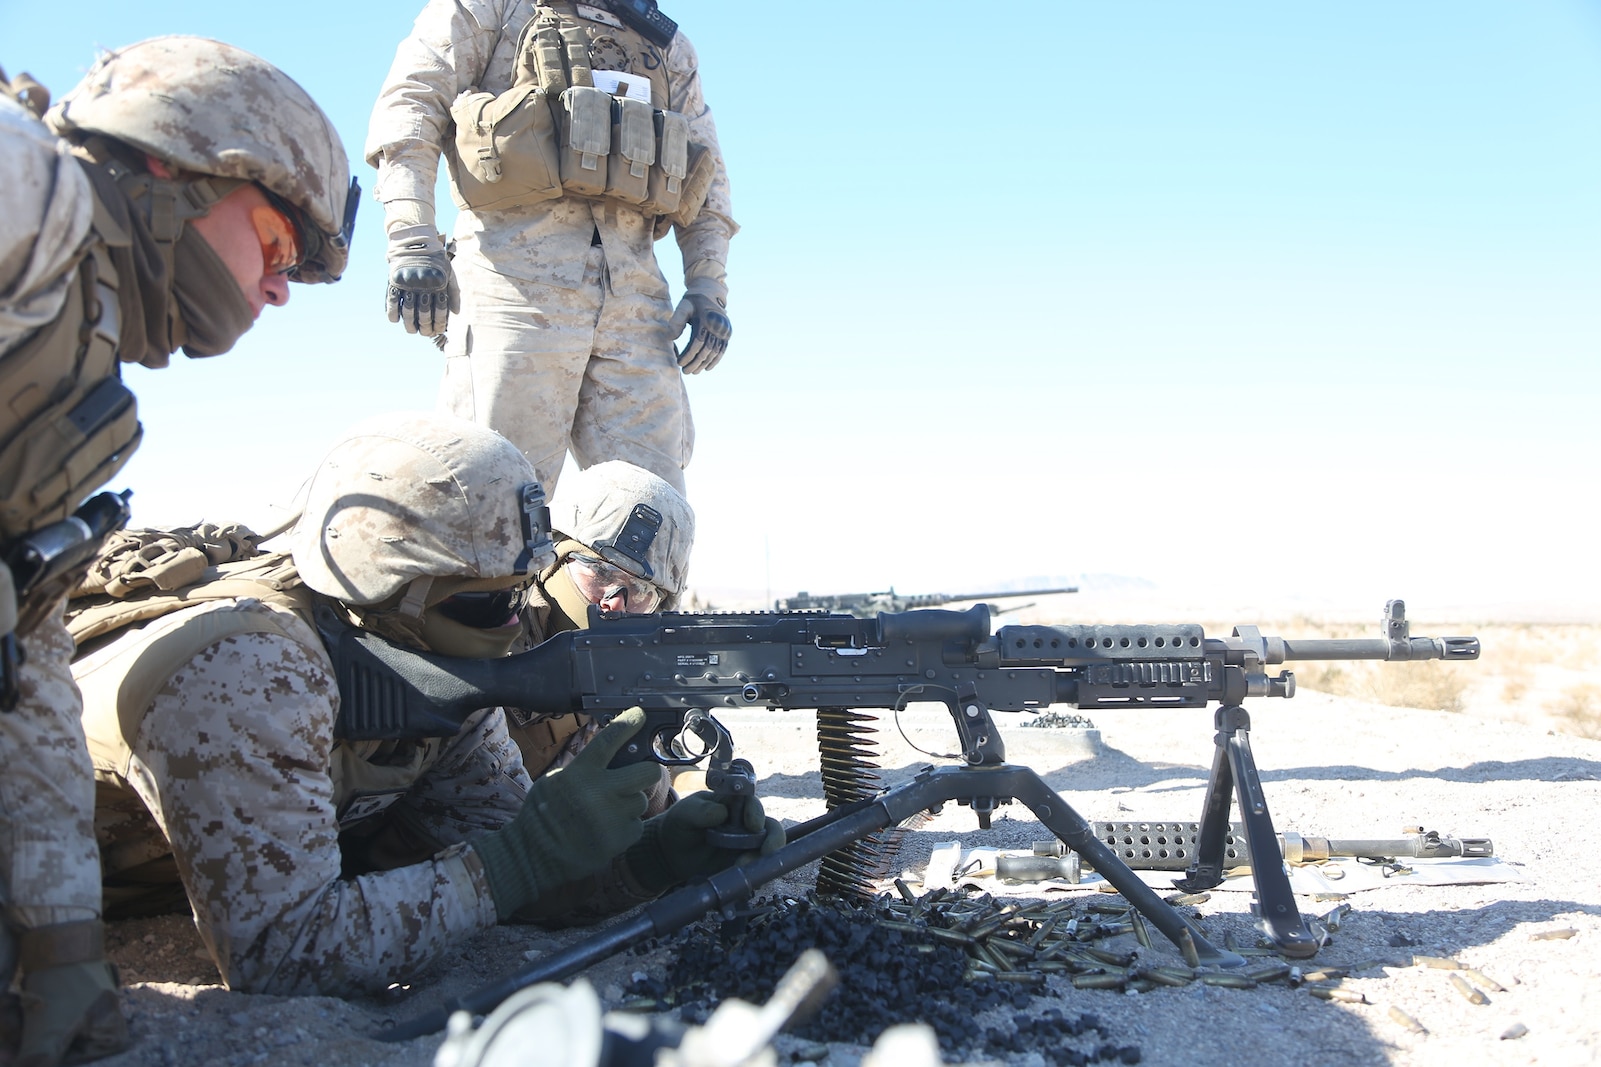 Marines with Motor Transportation Company, Combat Logistics Battalion 5, Combat Logistics Regiment 1, 1st Marine Logistics Group, operate an M240B medium machine gun as part of sustainment training leading up to Exercise Steel Knight 2014 aboard Marine Air Ground Combat Center Twentynine Palms, Calif., Dec. 9, 2013. SK14 is an annual exercise designed to prepare 1st Marine Division for deployment with the Marine Air-Ground Task Force as the Ground Combat Element with the support of 1st MLG and 3rd Marine Air Wing. Combined, the MAGTF is able to deploy and respond in a timely manner to any situation across the globe.  (U.S. Marine Corps photo by Lance Cpl. Shaltiel Dominguez/ Released)